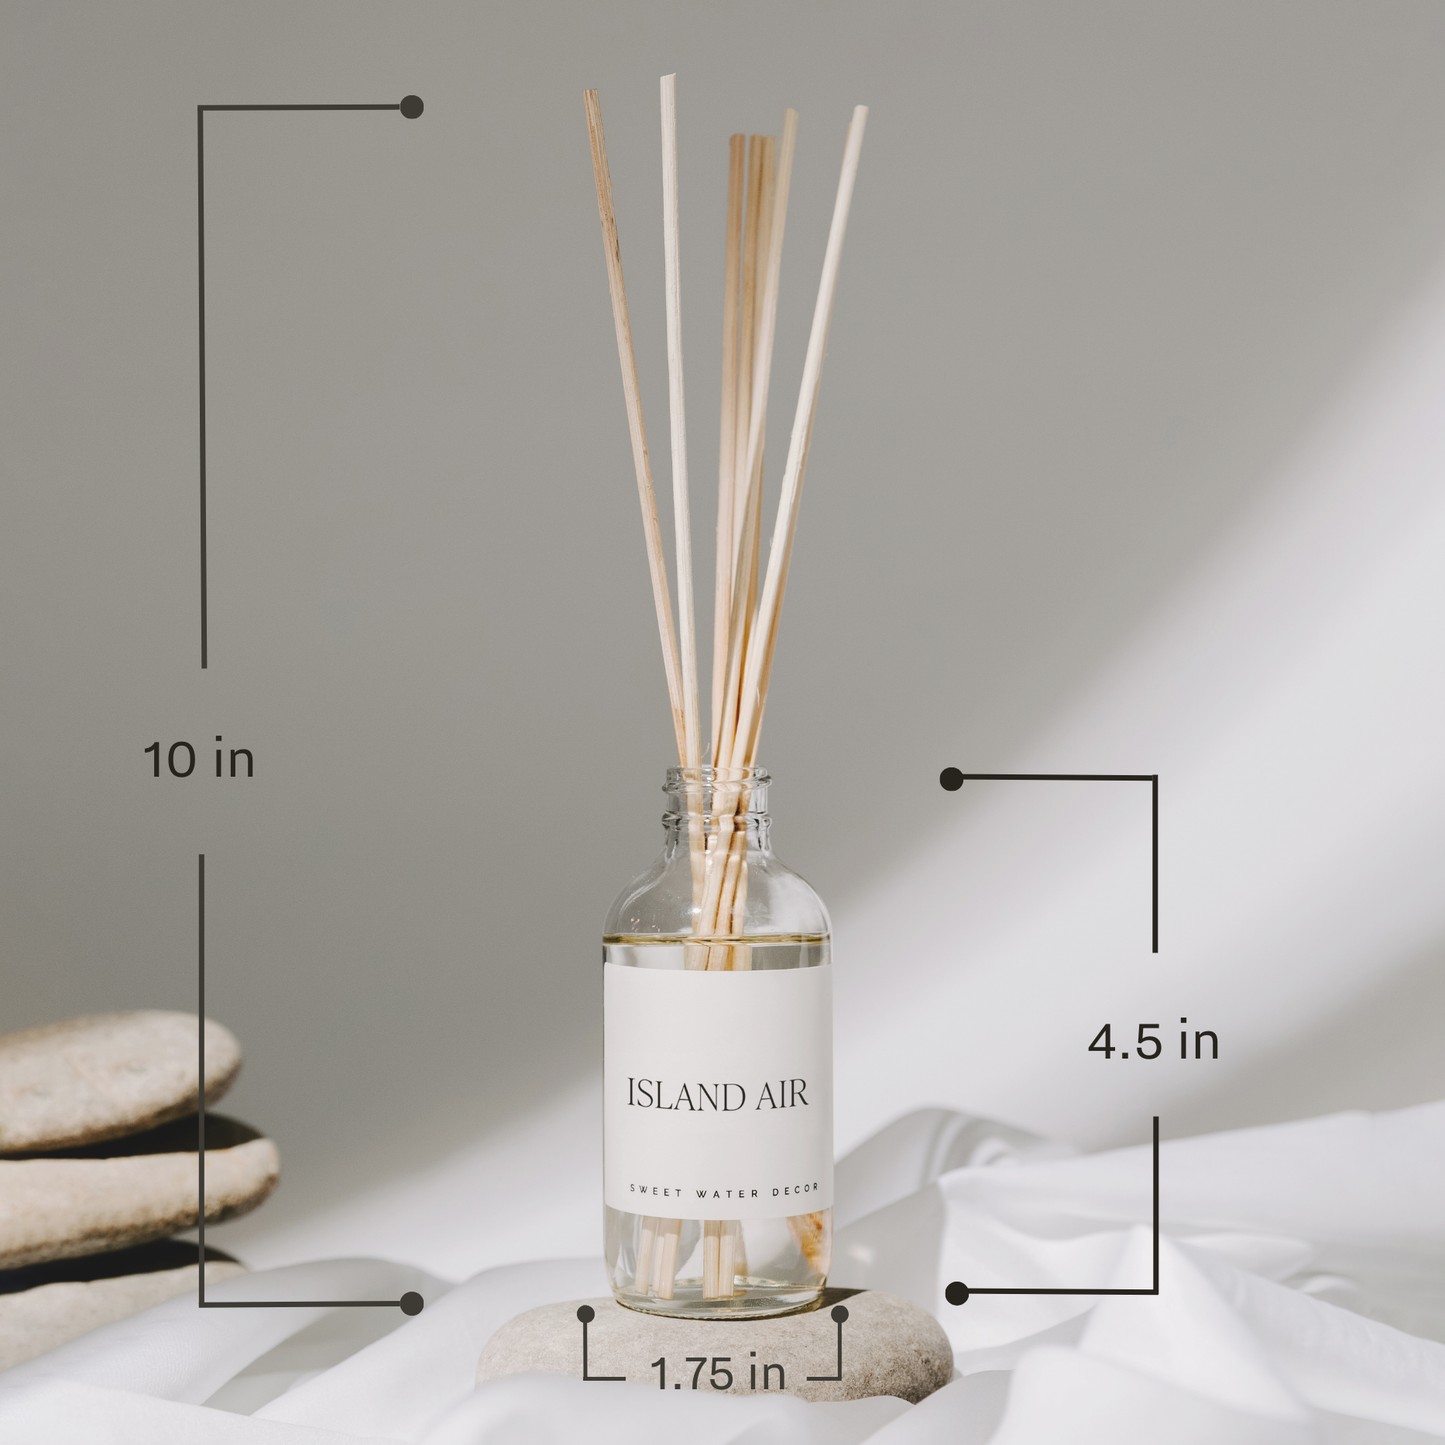 Lavender and Sage Reed Diffuser - Gifts & Home Decor